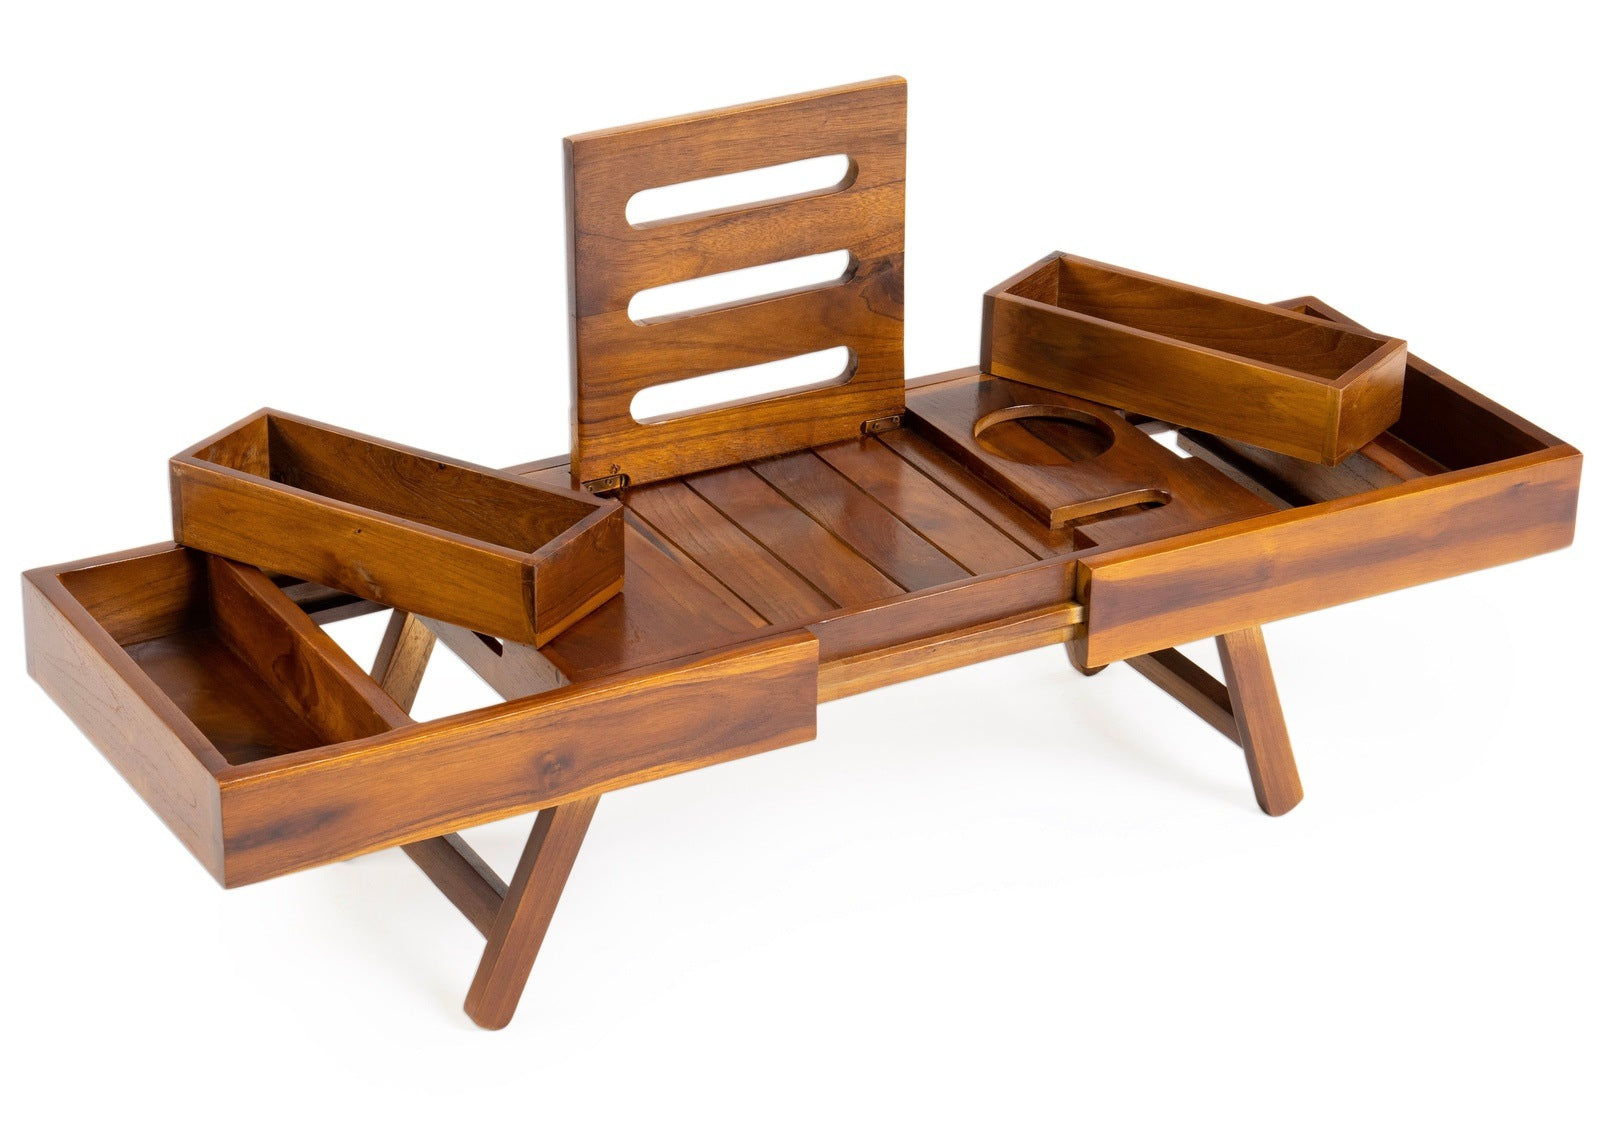 Ala Teak Wood Luxury Bathtub Caddy Tray with Extendable Sides and Bed Tray, Reading Rack, Tablet Holder